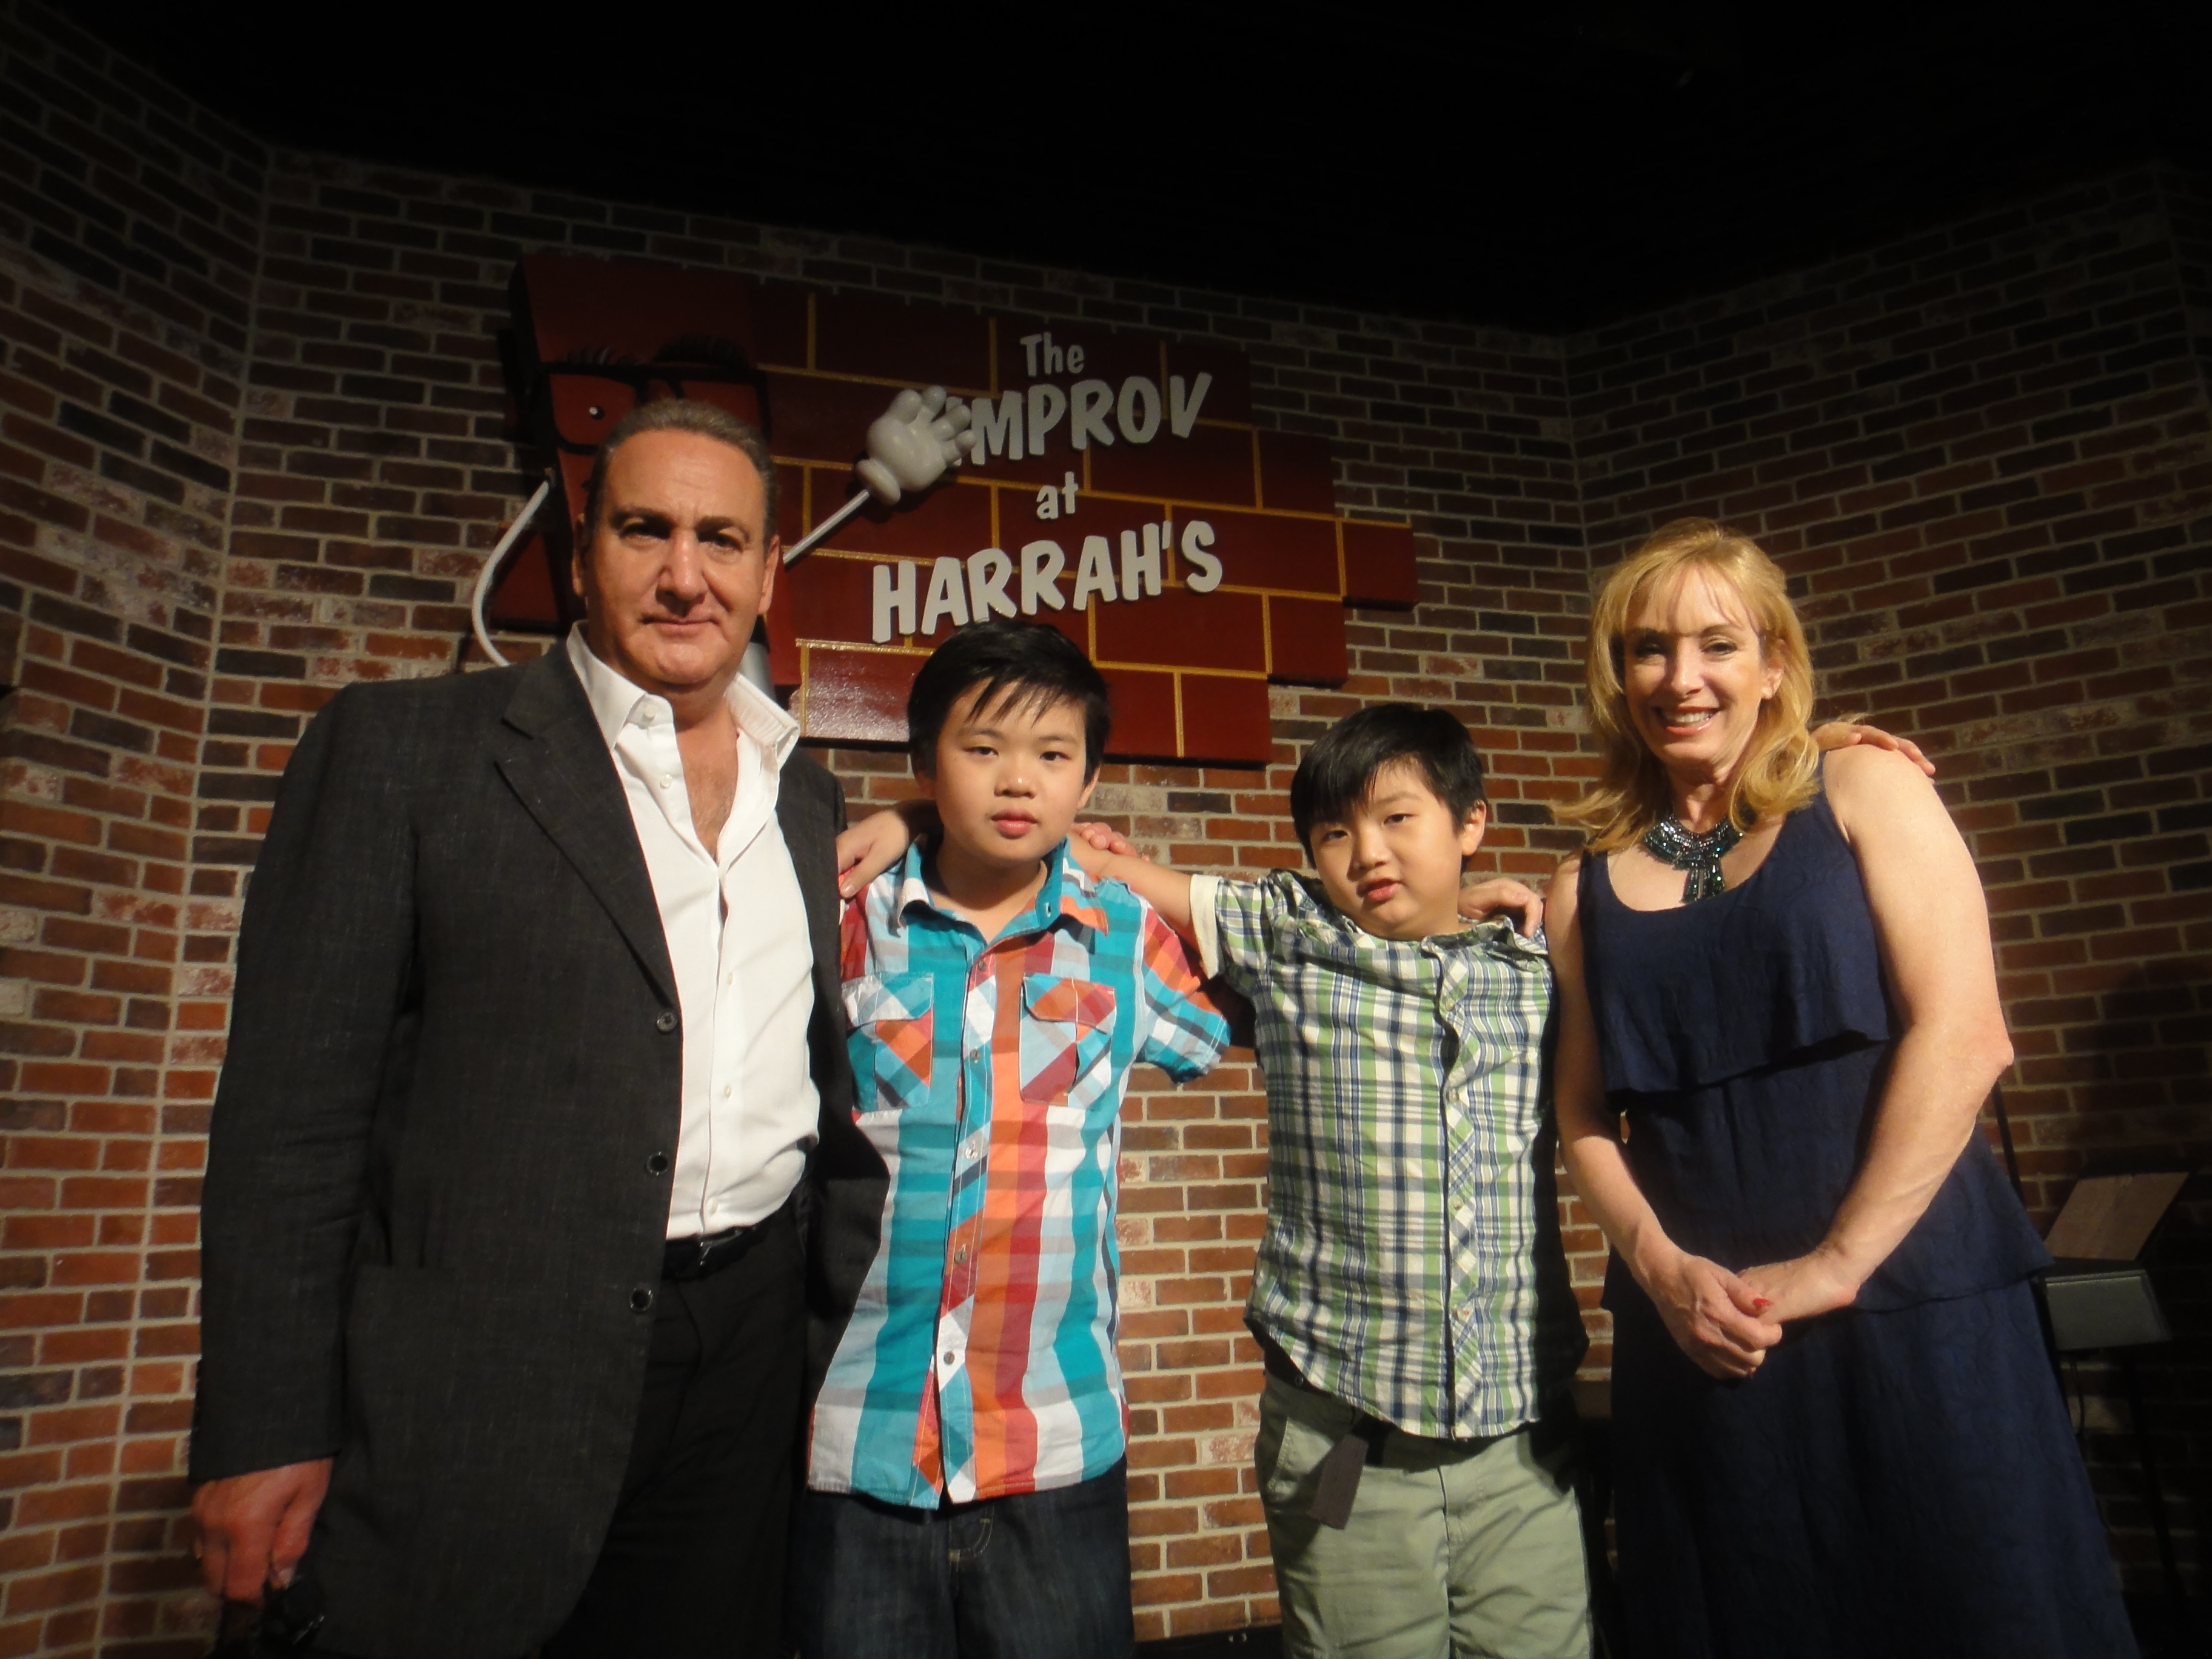 from left to right, Billy Riback (Disney Comedy Writer and Host), Michael zhang(Actor in The Avengers, 2012; and Space Warriors, 2013), Matthew Zhang (Stand up Comedian), and Joey Paul Jensen CSA/Producer (Soul Surfer, 2011)